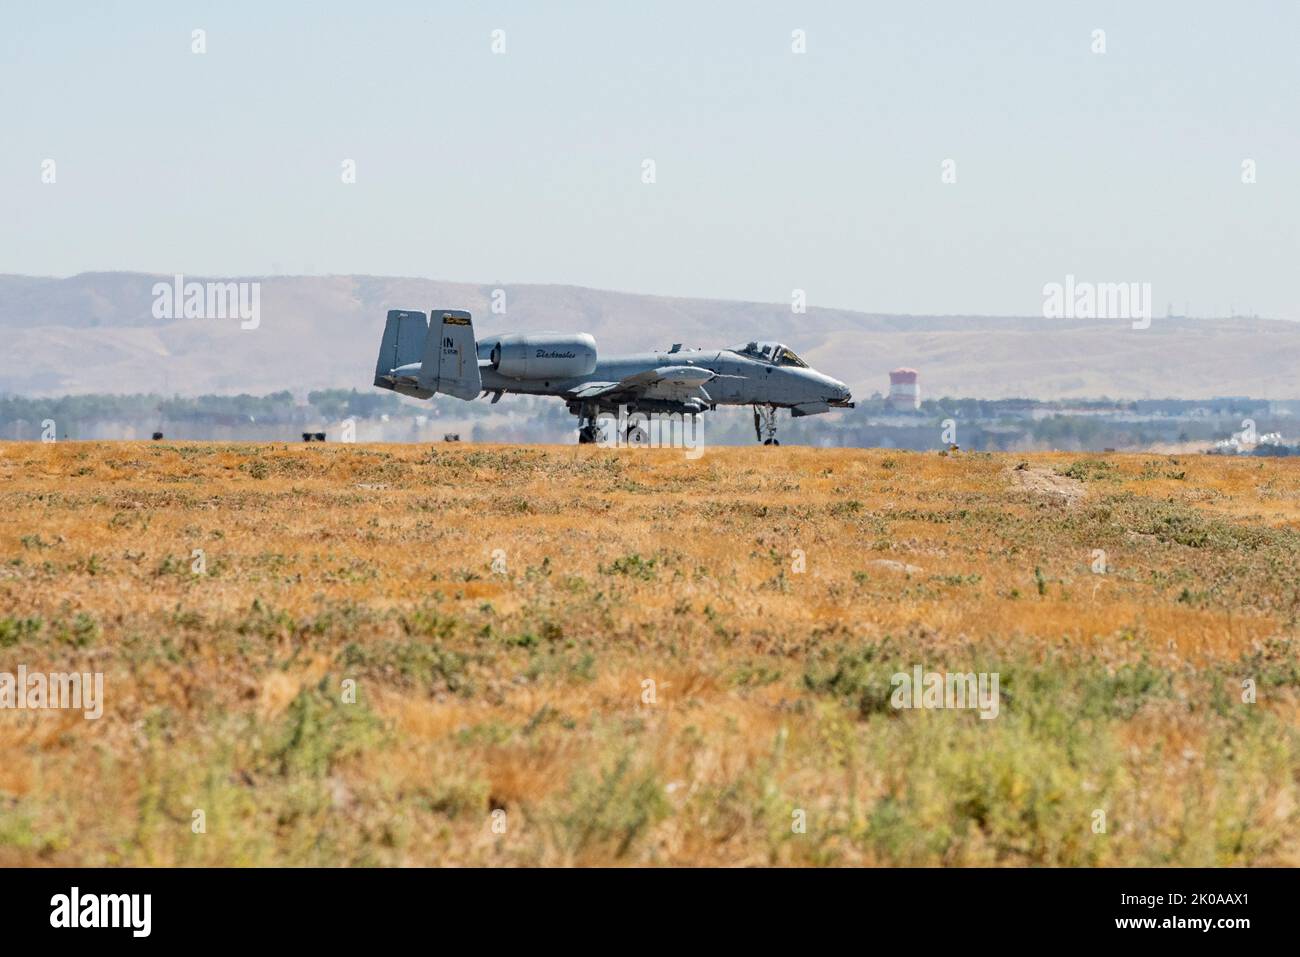 The Idaho Air National Guard’s 124th Fighter Wing is hosted the biennial A-10 Thunderbolt II competition, Hawgsmoke, Sept. 6-9, 2022. On Sept. 8, nearly 30 A-10s from across the nation took off from Gowen Field's flight line for the competition that took place at Idaho's Saylor Creek Range. At the previous competition, Hawgsmoke 2021, the 124th Fighter Wing’s 190th Fighter Squadron was recognized as the top pilot team at Moody Air Force Base, Georgia. The winning team traditionally hosts the next competition. The 190th Fighter Squadron won all three team awards in 2021: overall champion, top b Stock Photo